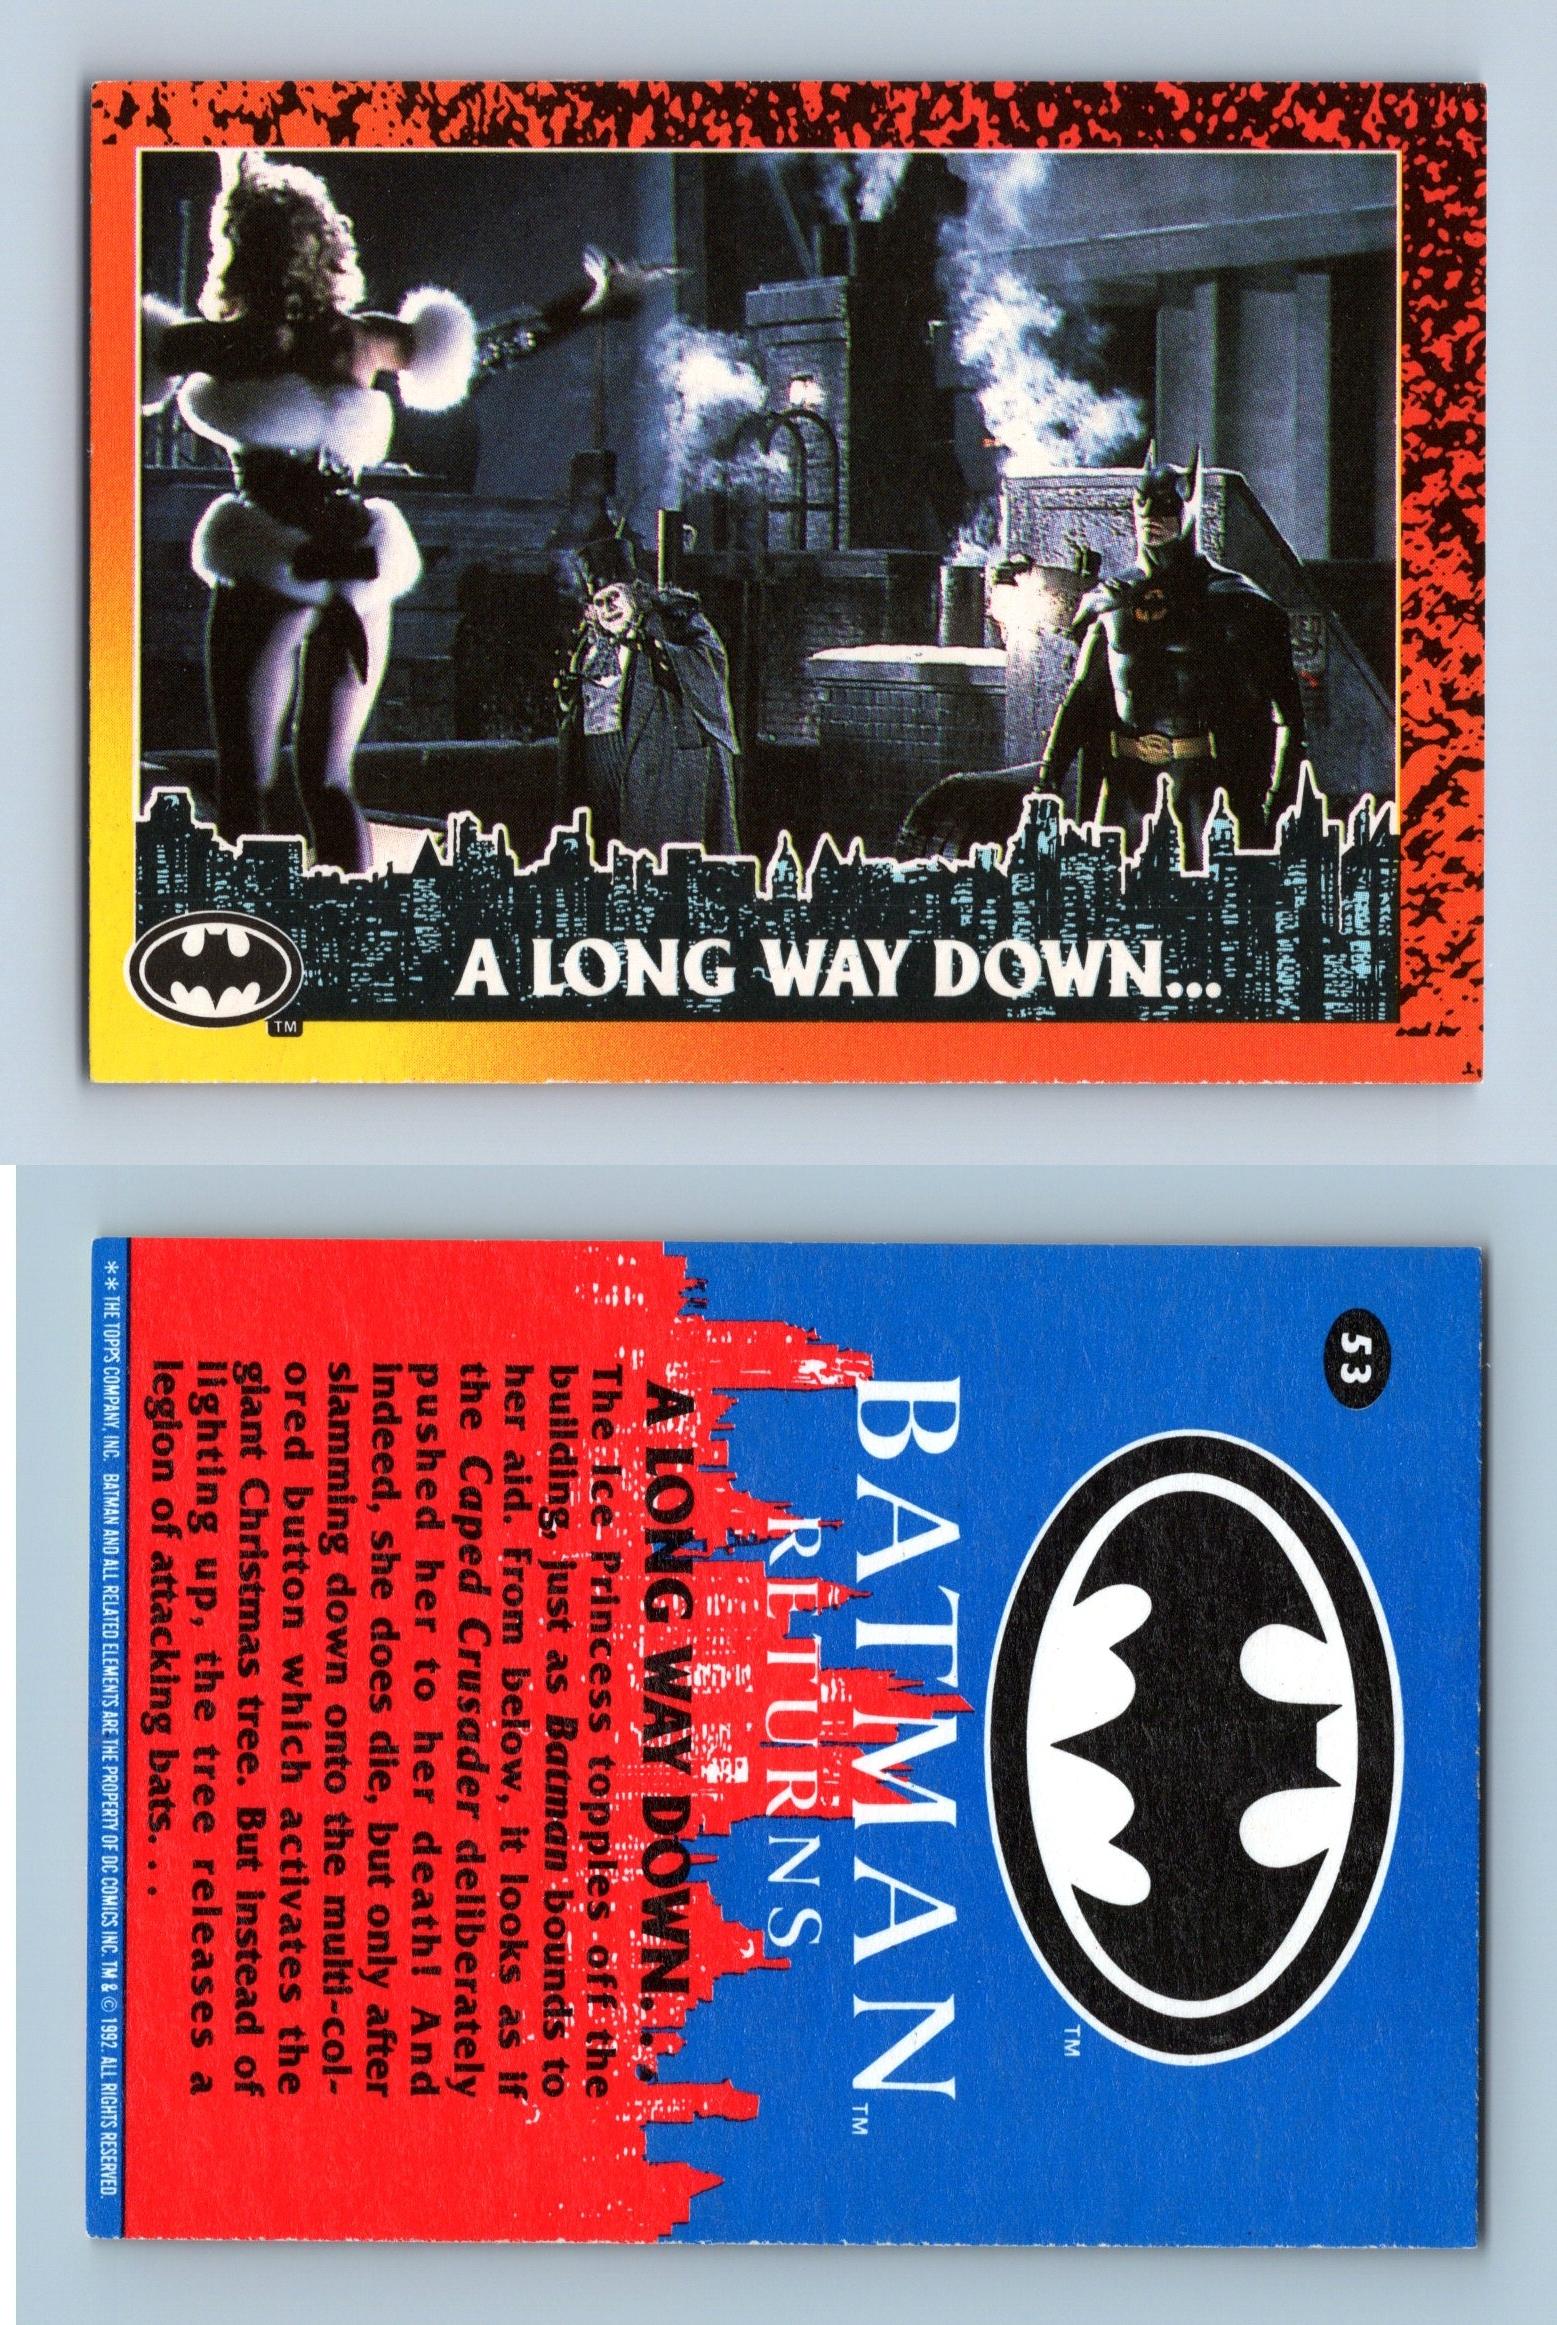 Rescuing The Ice Princess #49 Batman Returns 1992 Topps Trading Card